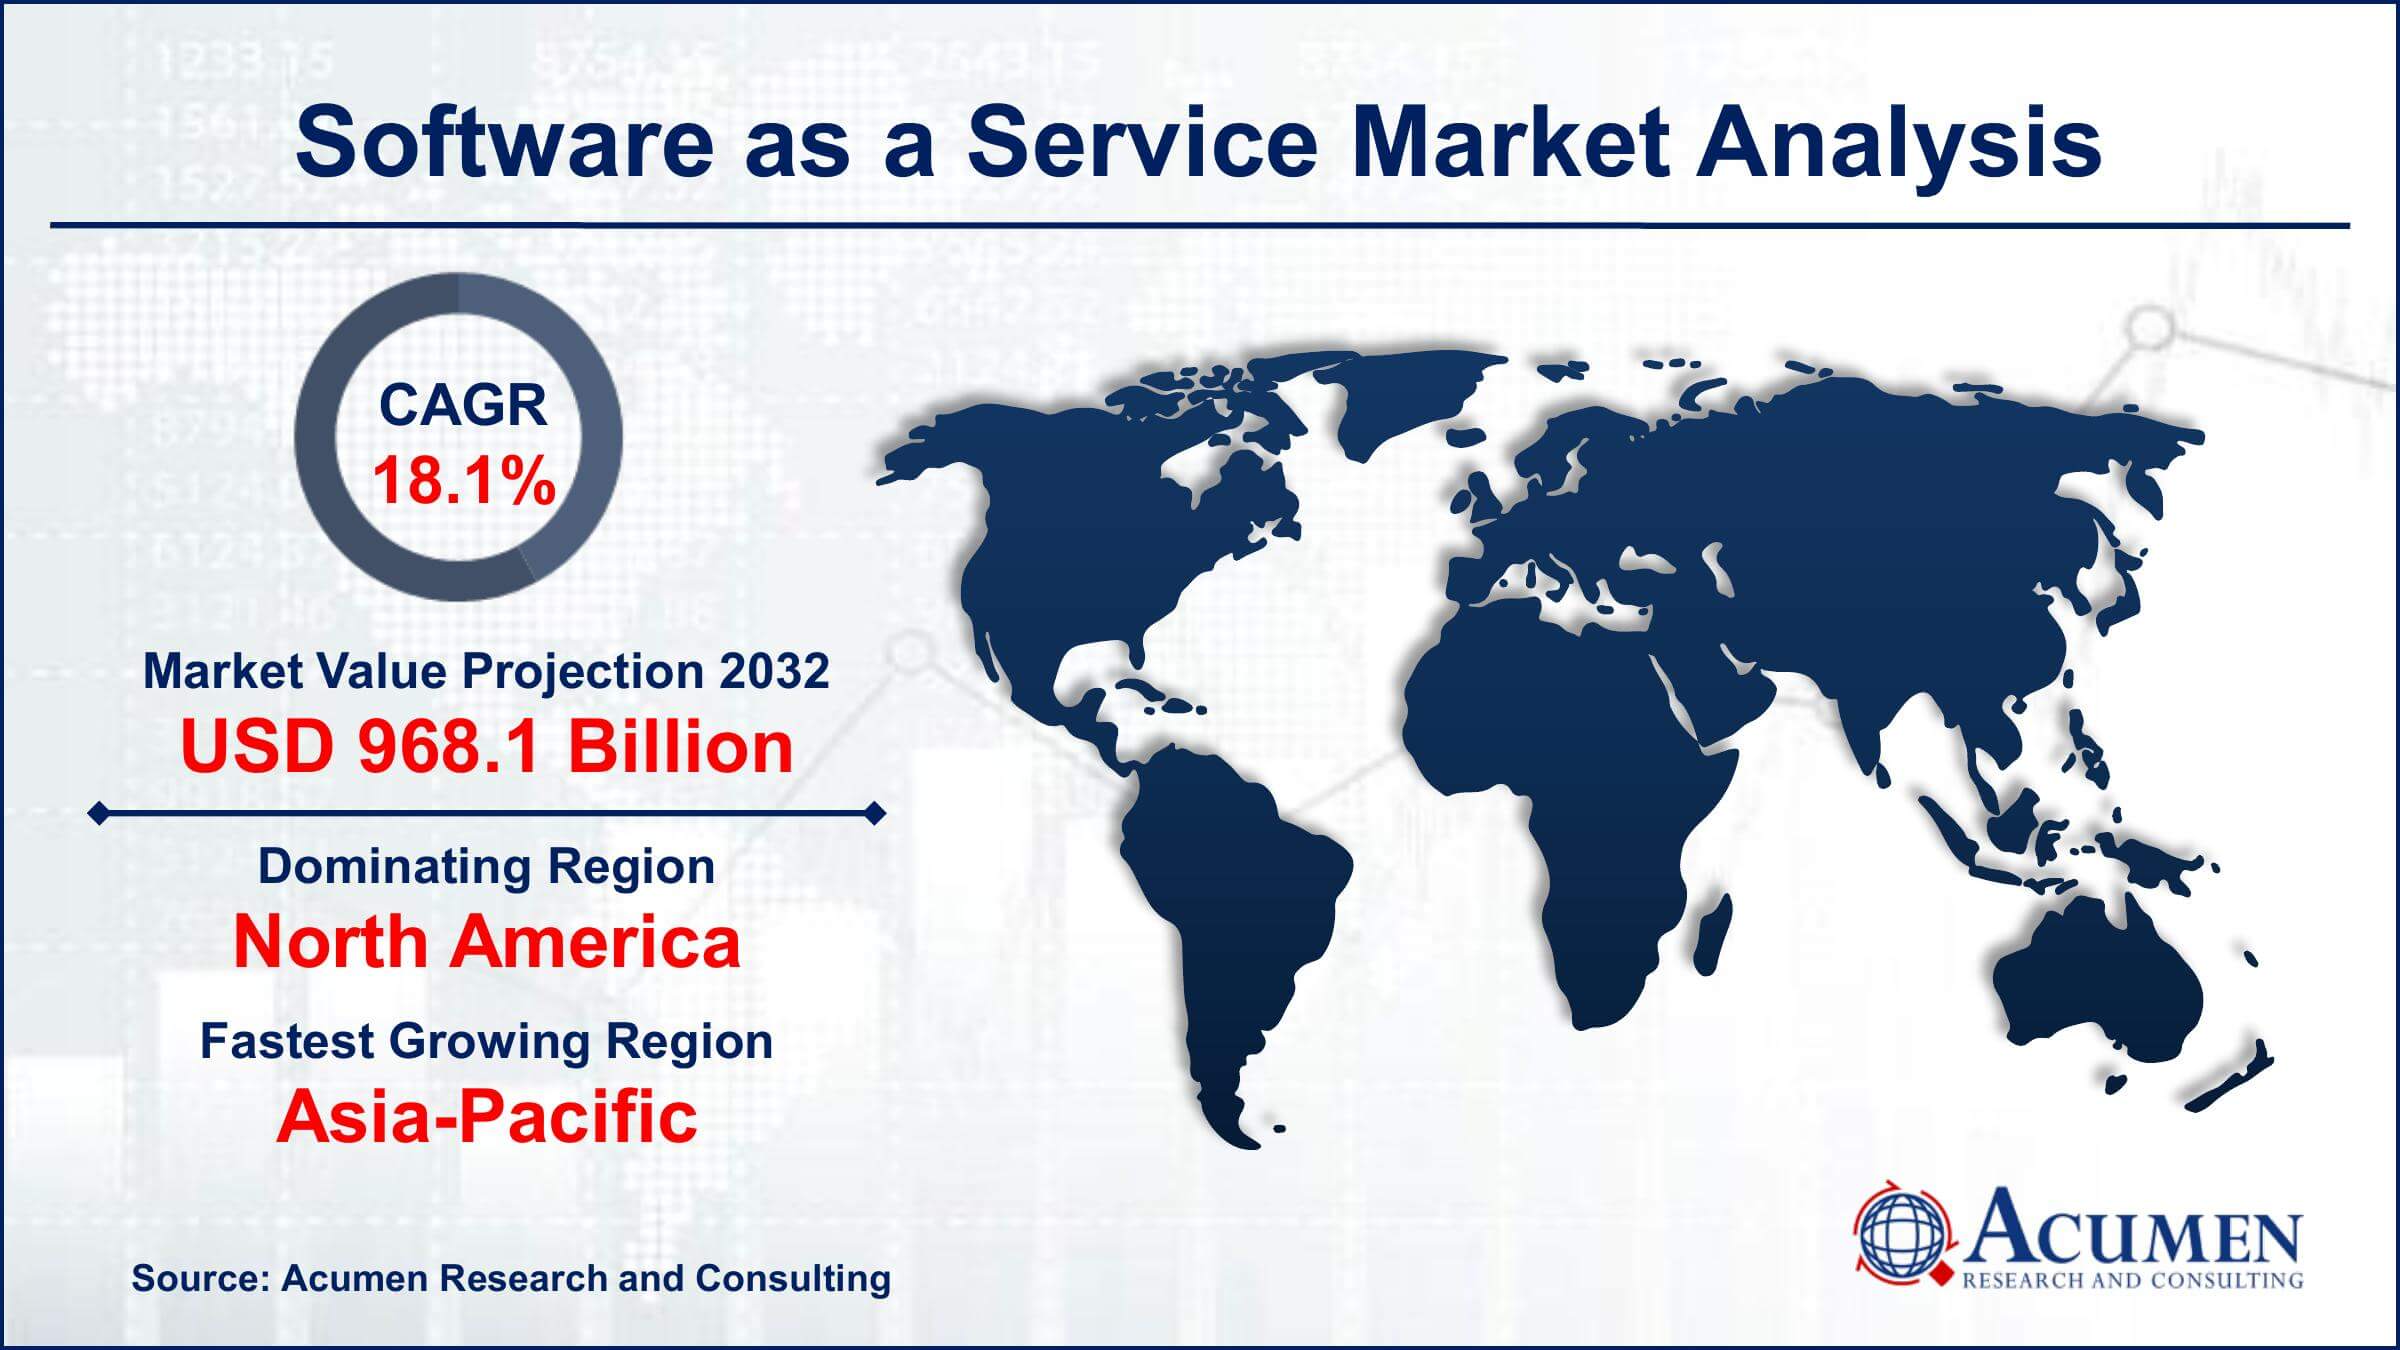 Global Software as a Service Market Trends